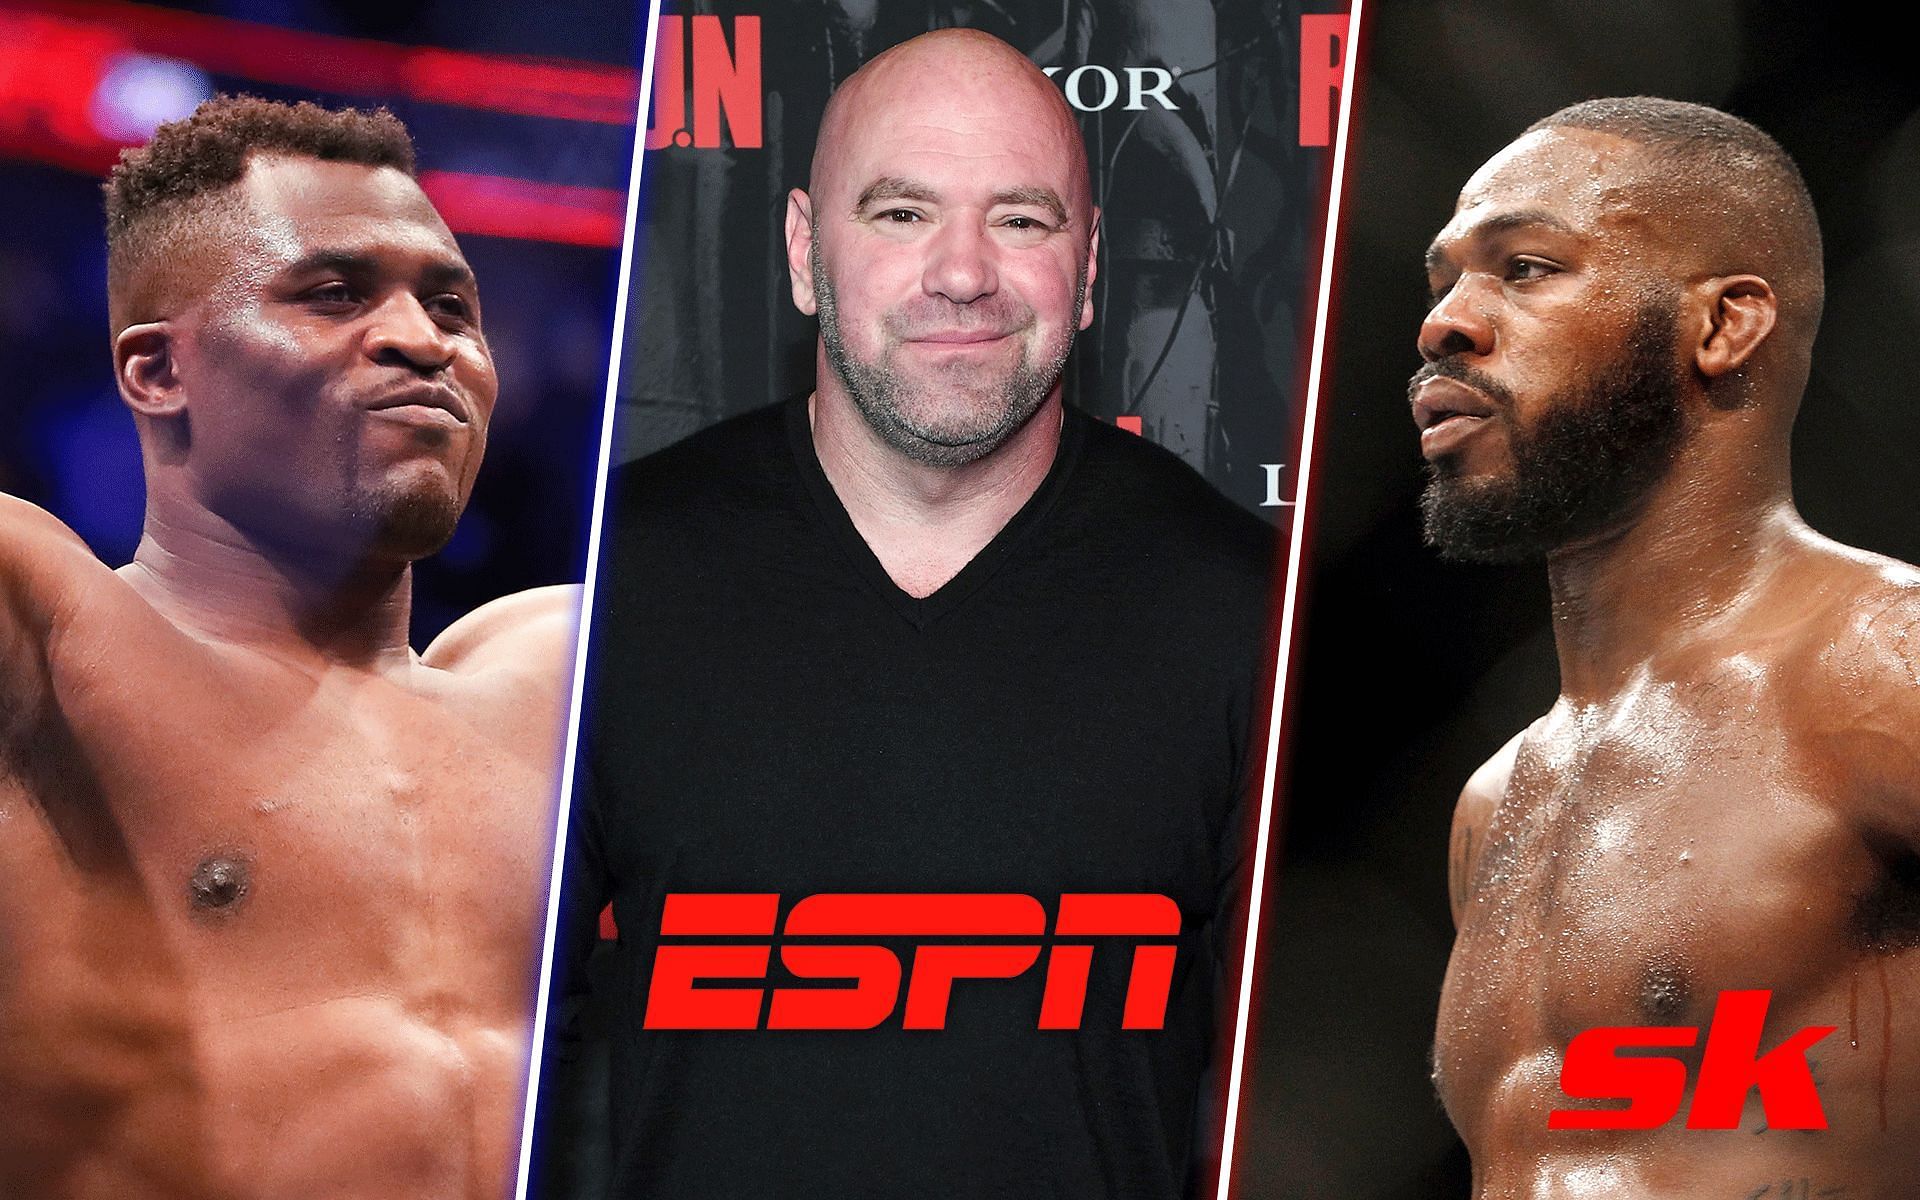 Francis Ngannou (left), Dana White and ESPN (middle) and Jon Jones (right) [Images Courtesy: @ESPN on Instagram and @GettyImages]